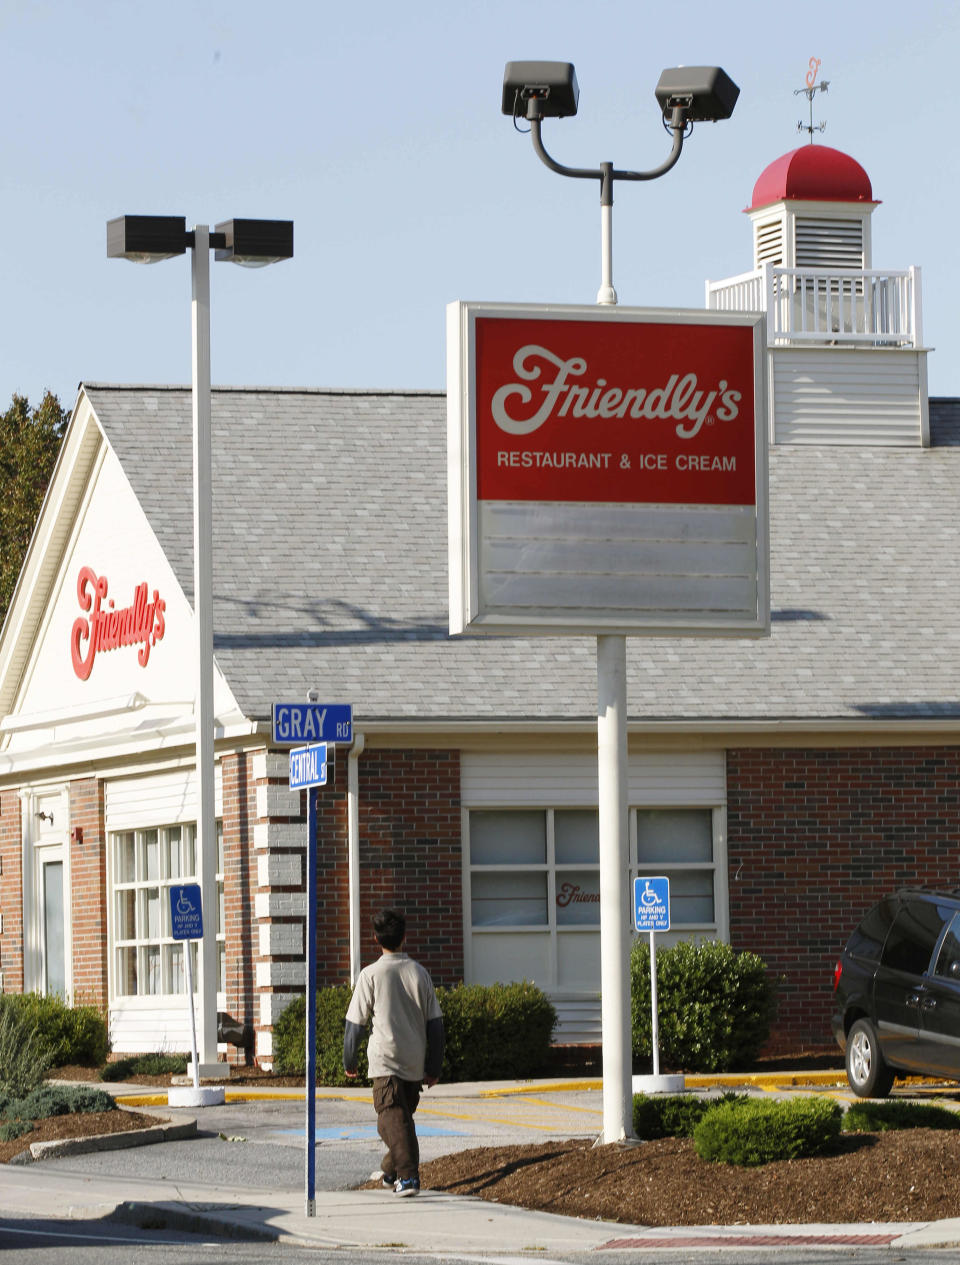 A boy walks past the Friendly's restaurant in Foxborough, Mass., Wednesday, Oct. 5, 2011.  The parent of the Massachusetts-based Friendly's restaurant chain filed for Chapter 11 bankruptcy  protection on Wednesday and said that it has already closed 63 of its stores. Each store employed about 20 people, so about 1,260 jobs were lost. (AP Photo/Charles Krupa)